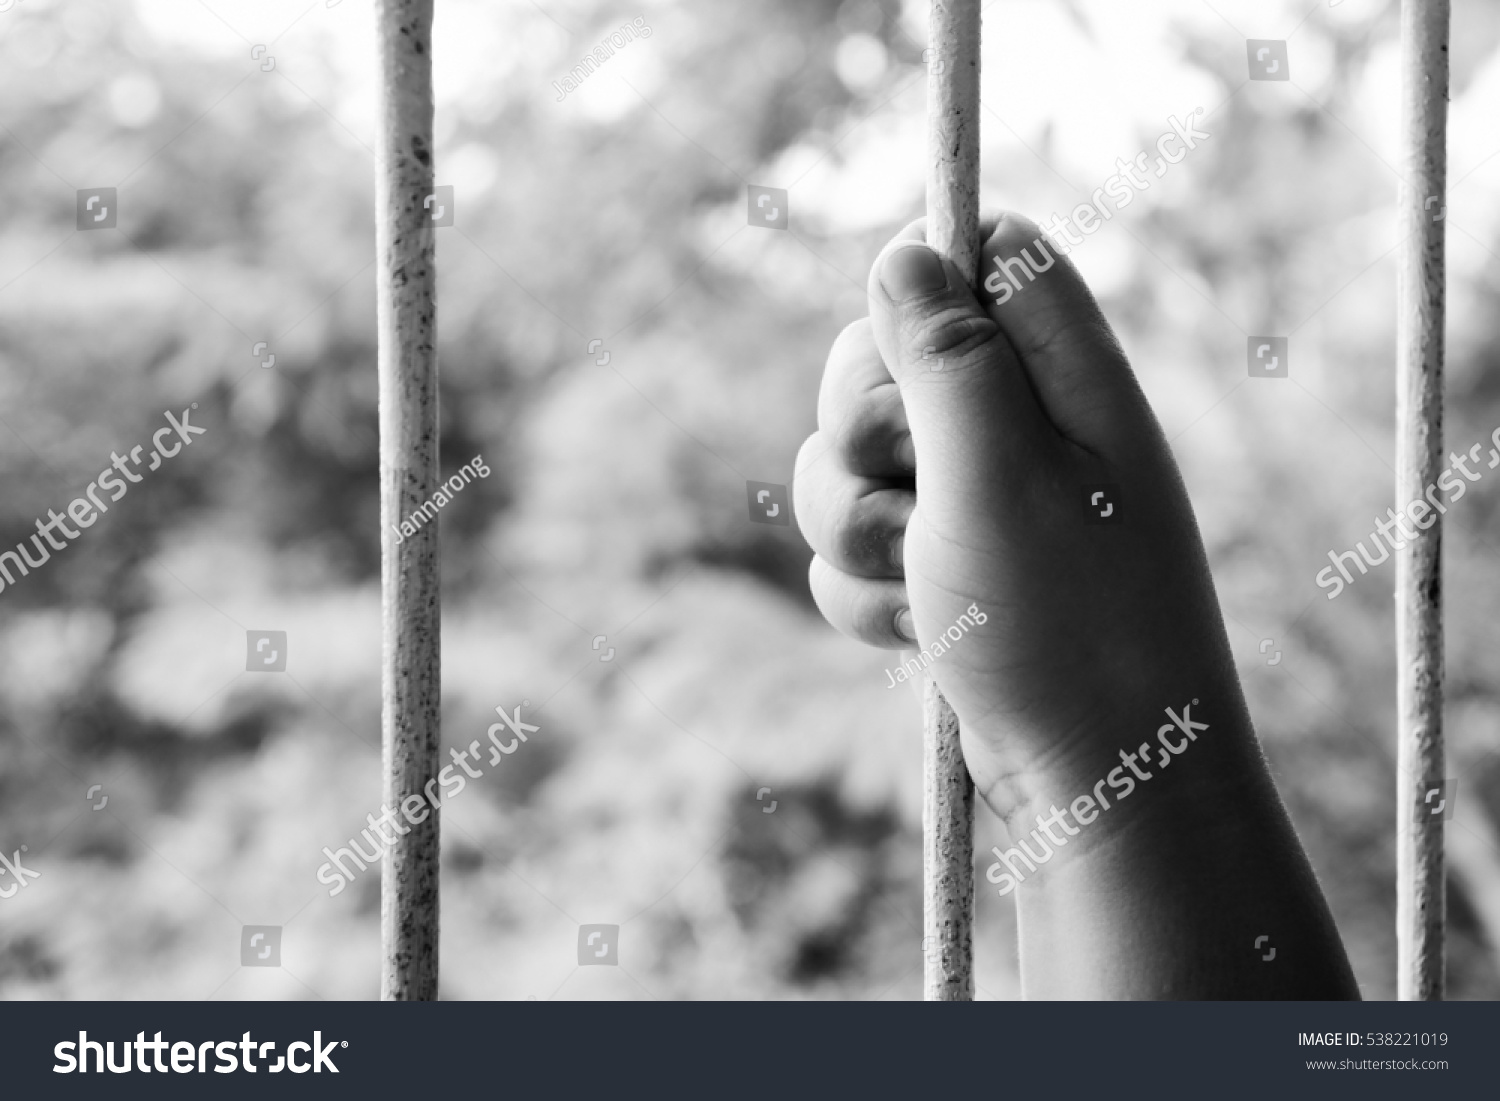 Blurred face prostitution woman grasps the bar in cage or prison with no freedom concept trying to escape or break out black and white version #538221019